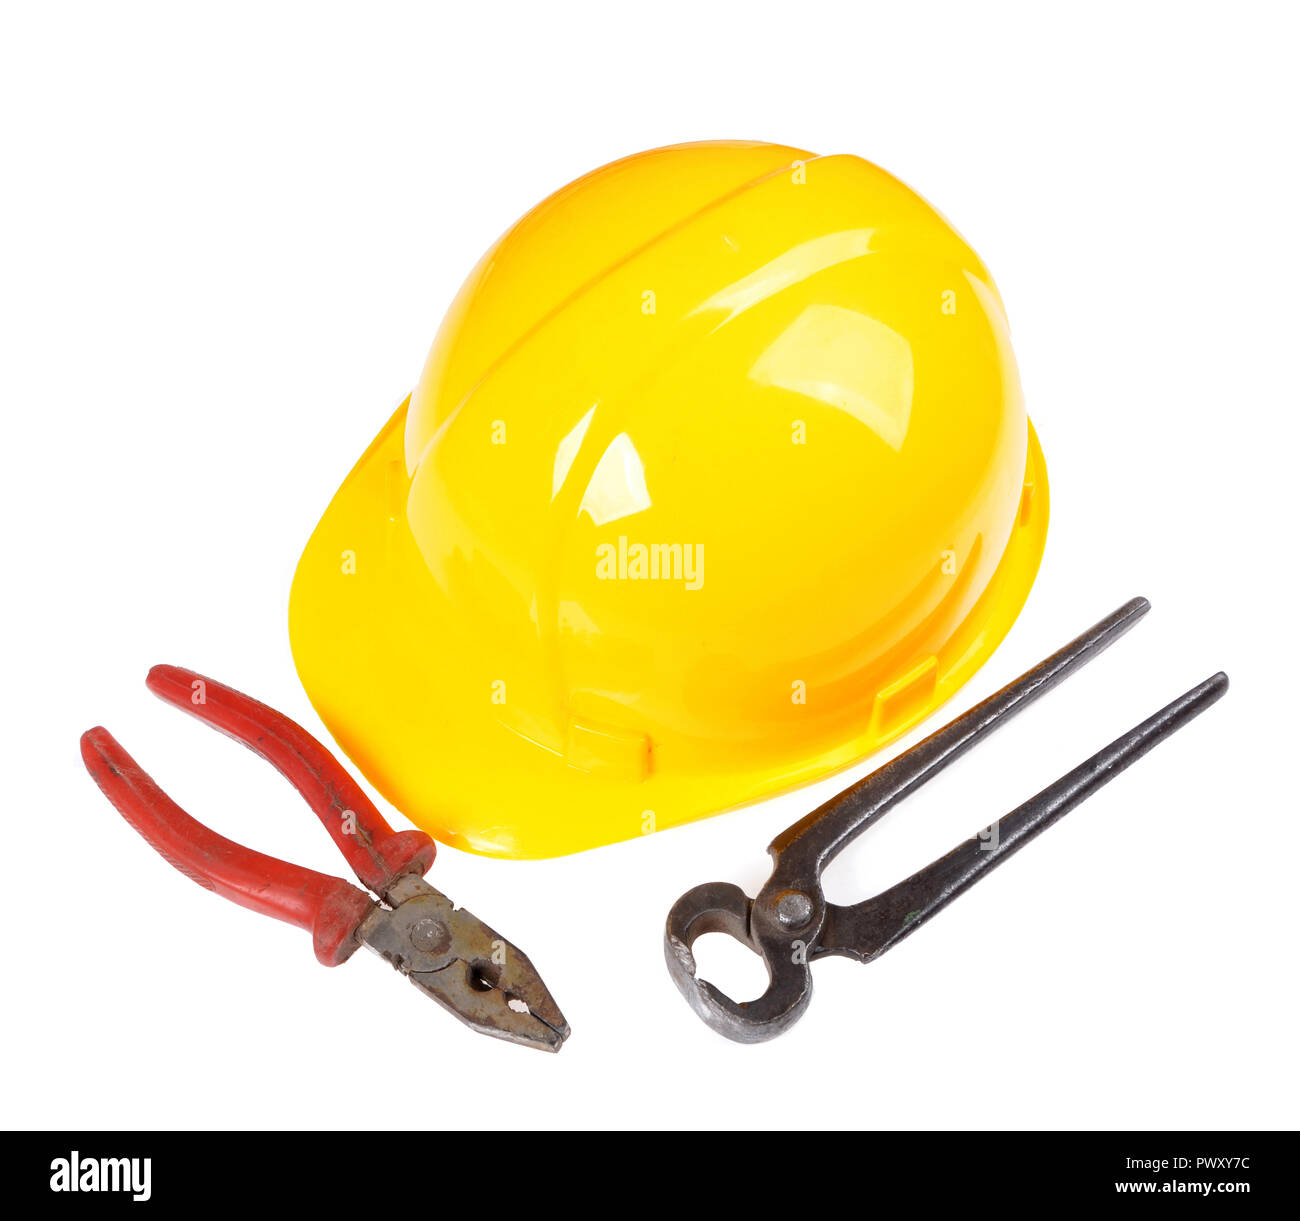 Construction hat gloves Cut Out Stock Images & Pictures - Page 3 - Alamy